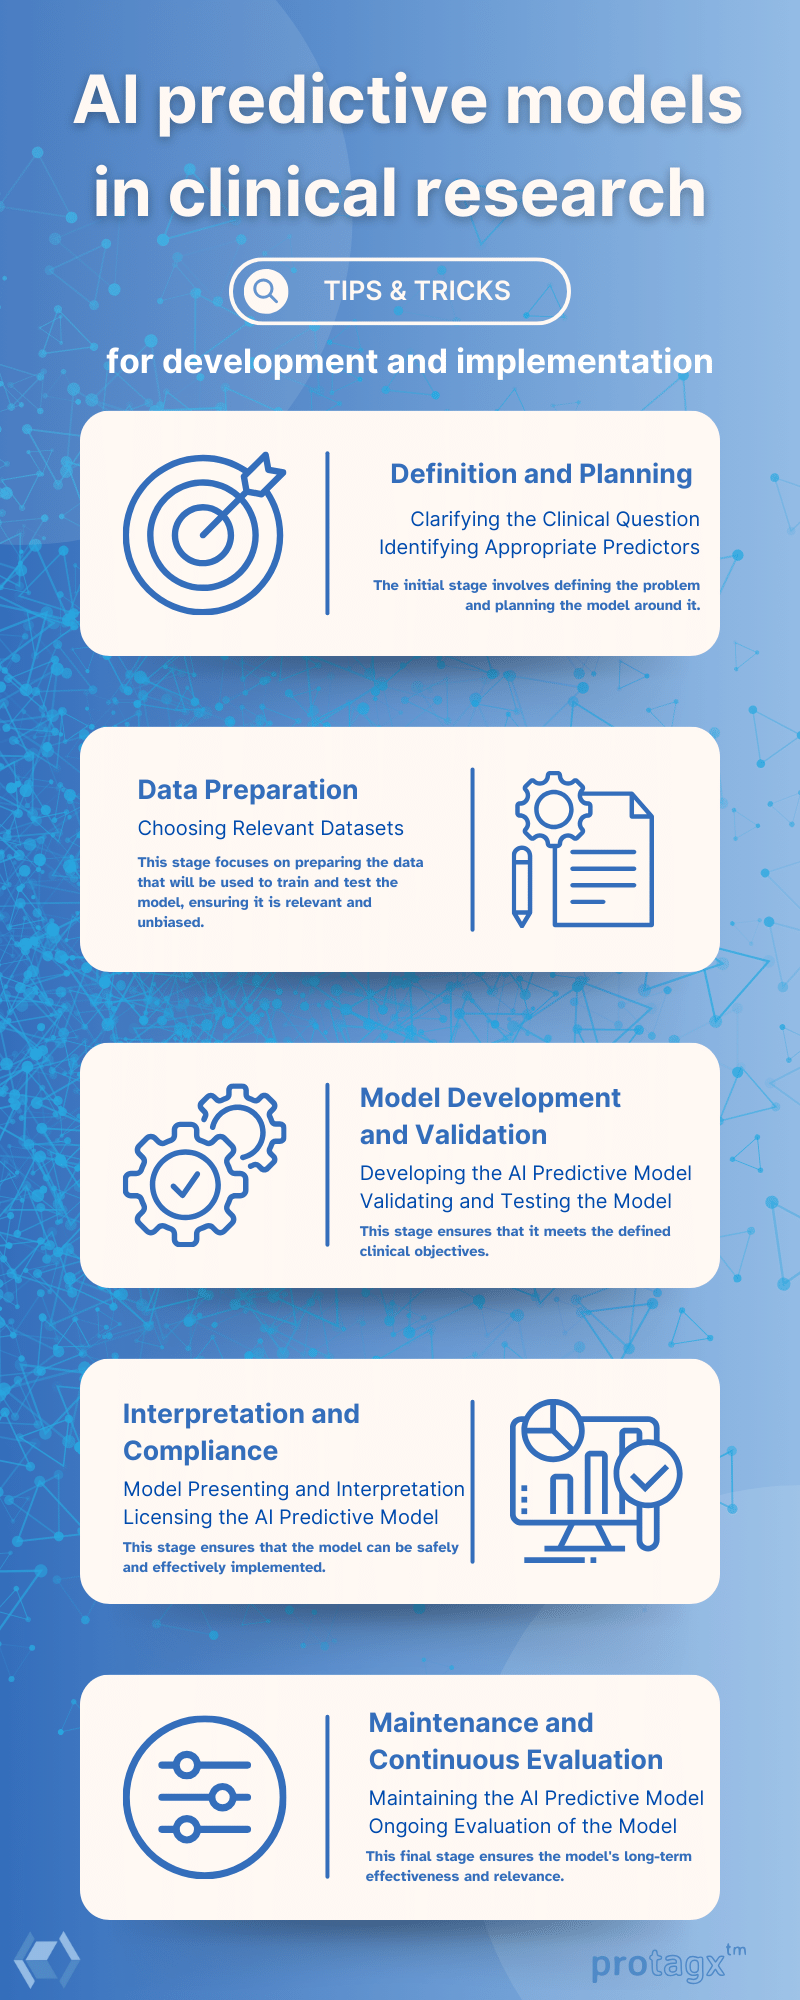 _AI predictive models in clinical research - Infographic